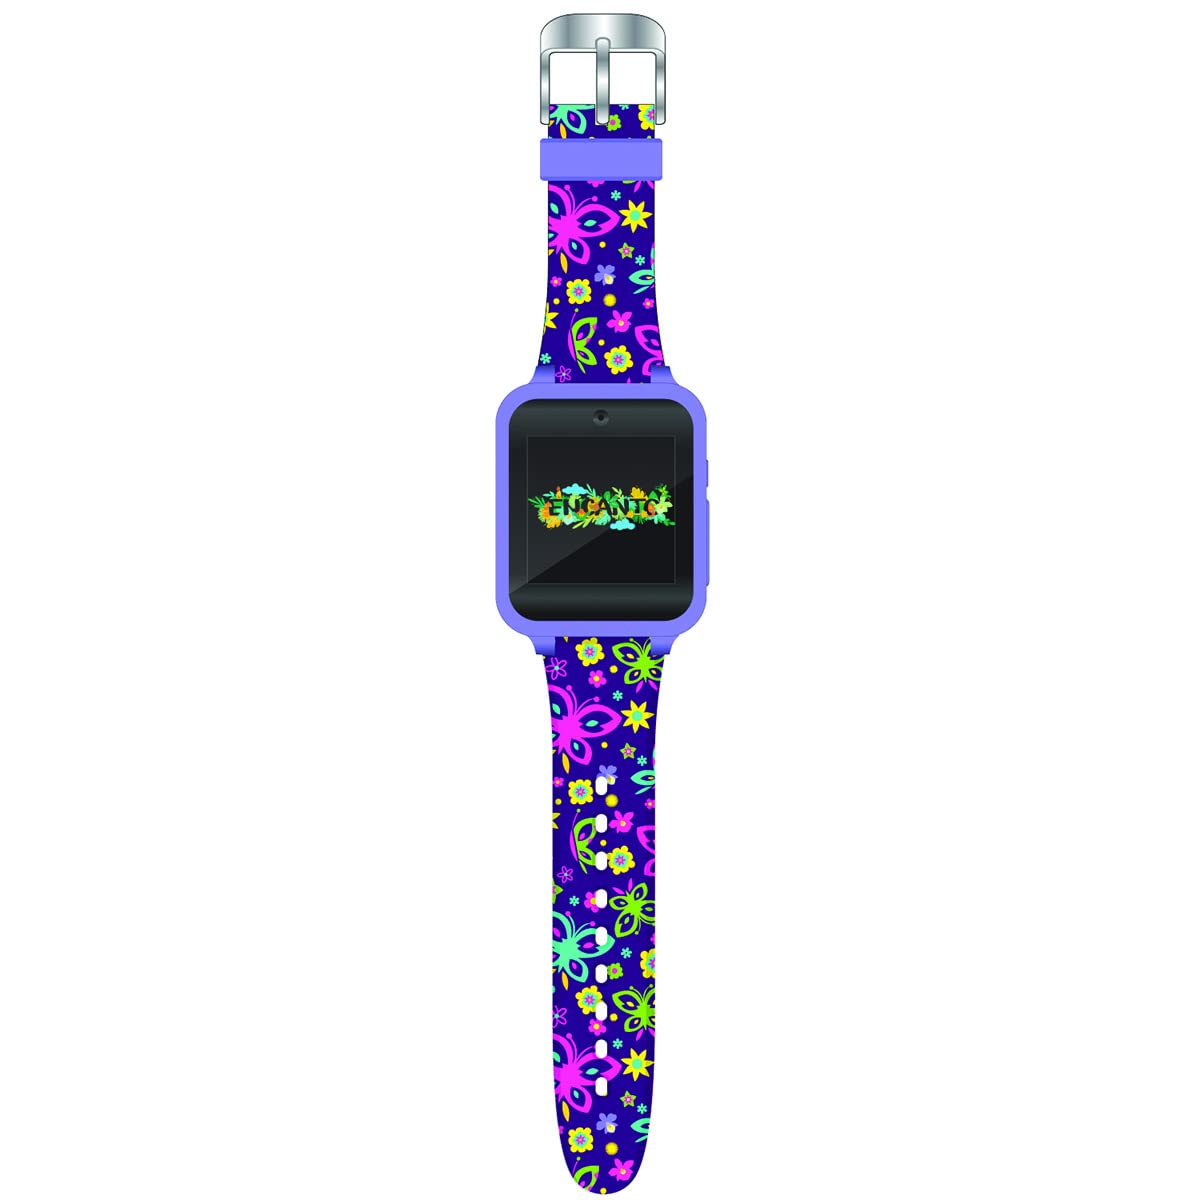 Accutime Disney Encanto Kids Smart Watch for Girls & Boys - Interactive Smartwatch with Selfie Camera, Games, Voice & Video Recorder, Pedometer, Calculator, Alarm, USB Charger